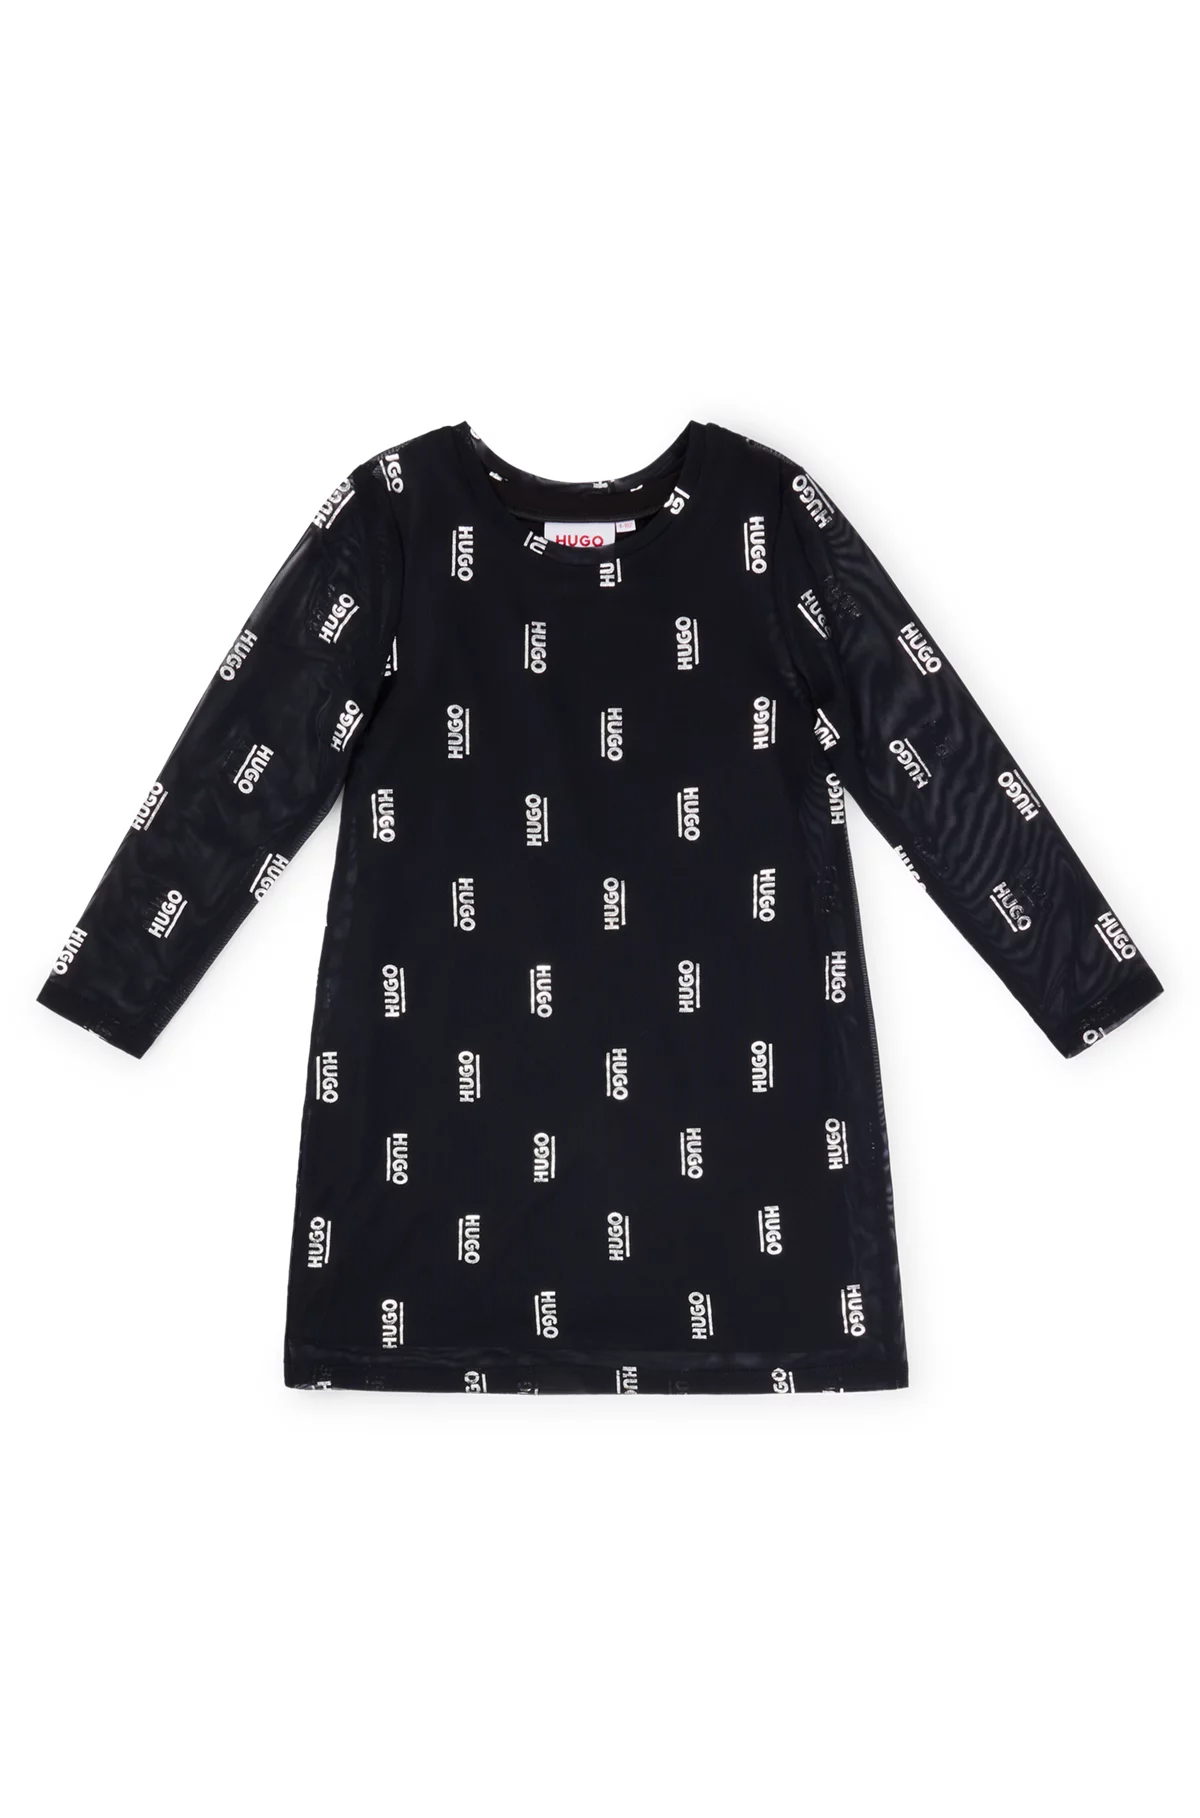 KIDS' TWO-IN-ONE DRESS WITH FOIL-PRINTED LOGOS